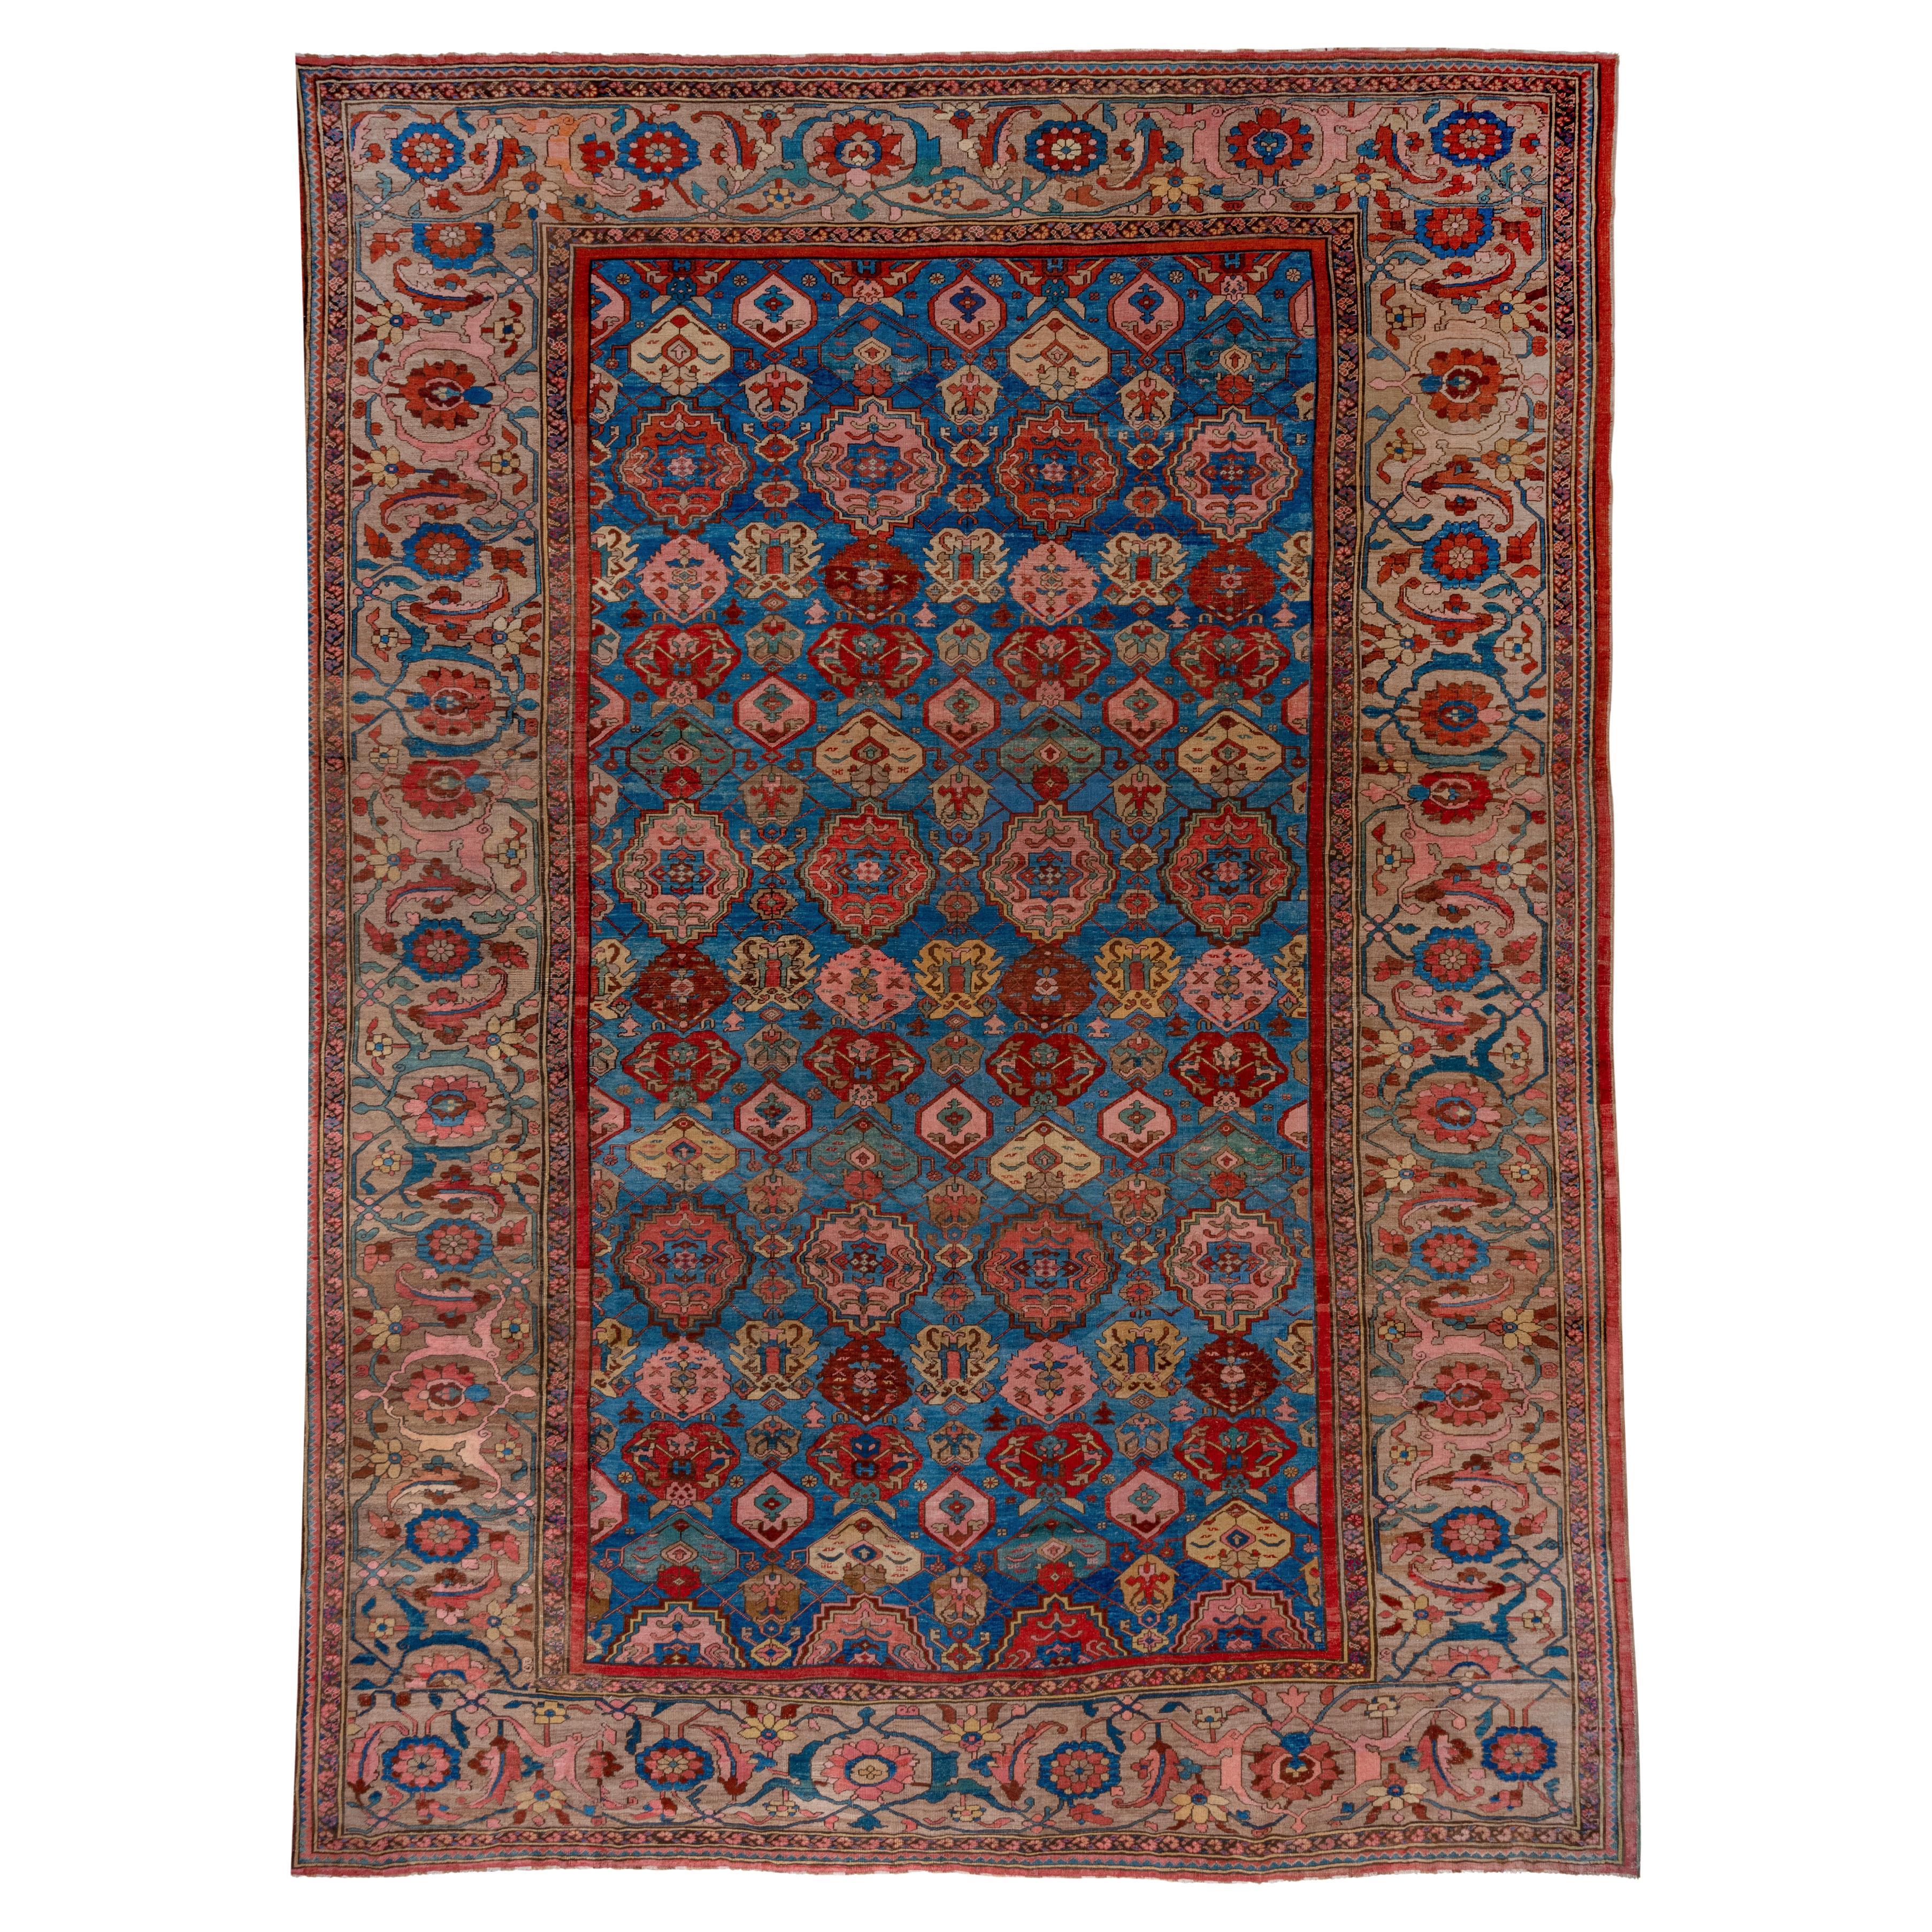 Outsanding Colorful Antique Persian Bakhshayesh Carpet, Late 19th Century